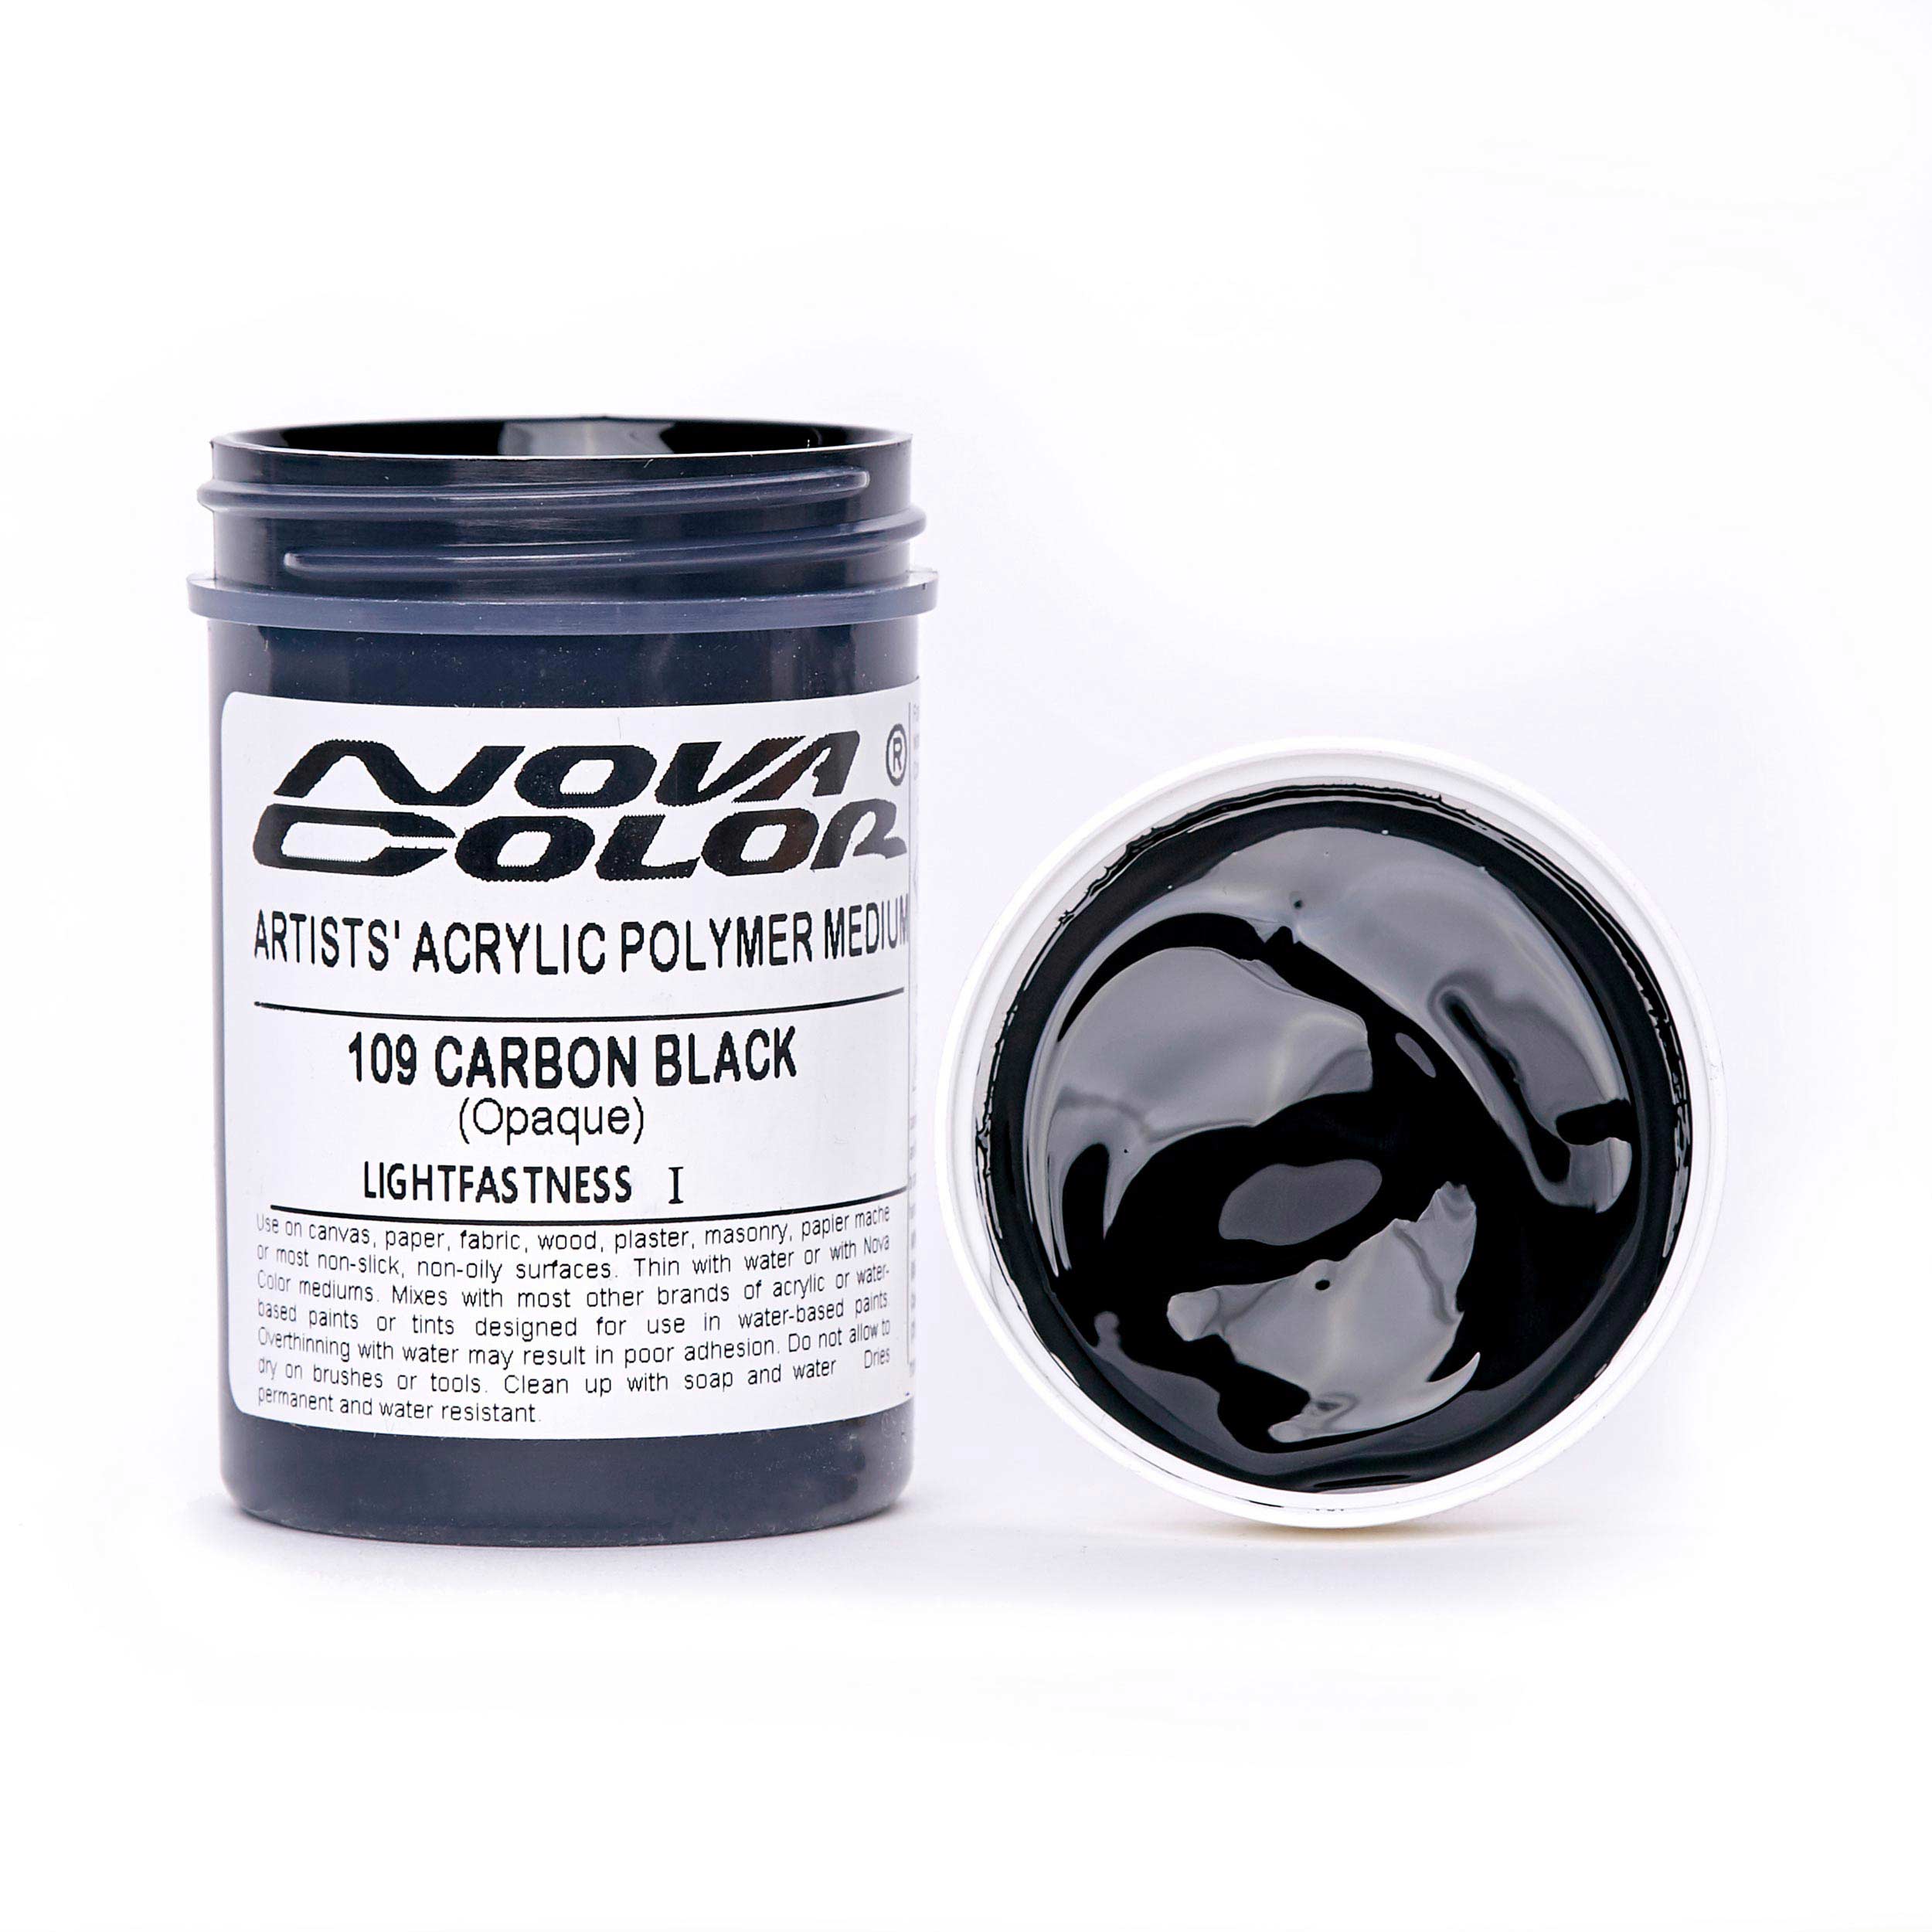 The Search for the Blackest Black Acrylic Paint –